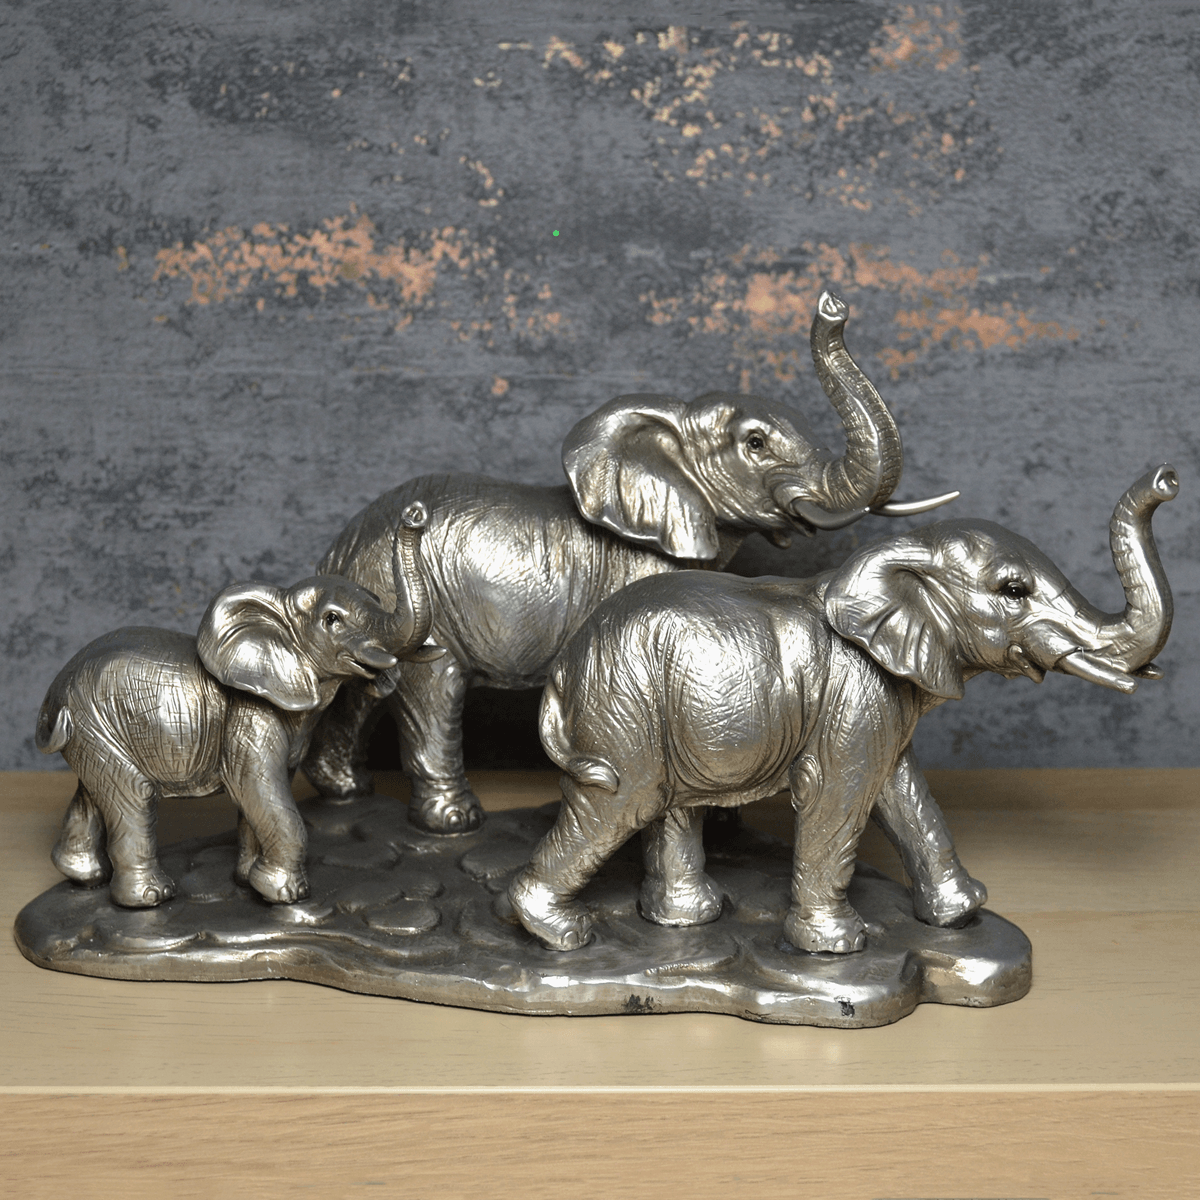 Antique Silver Elephant Family Ornament - TwoBeeps.co.uk